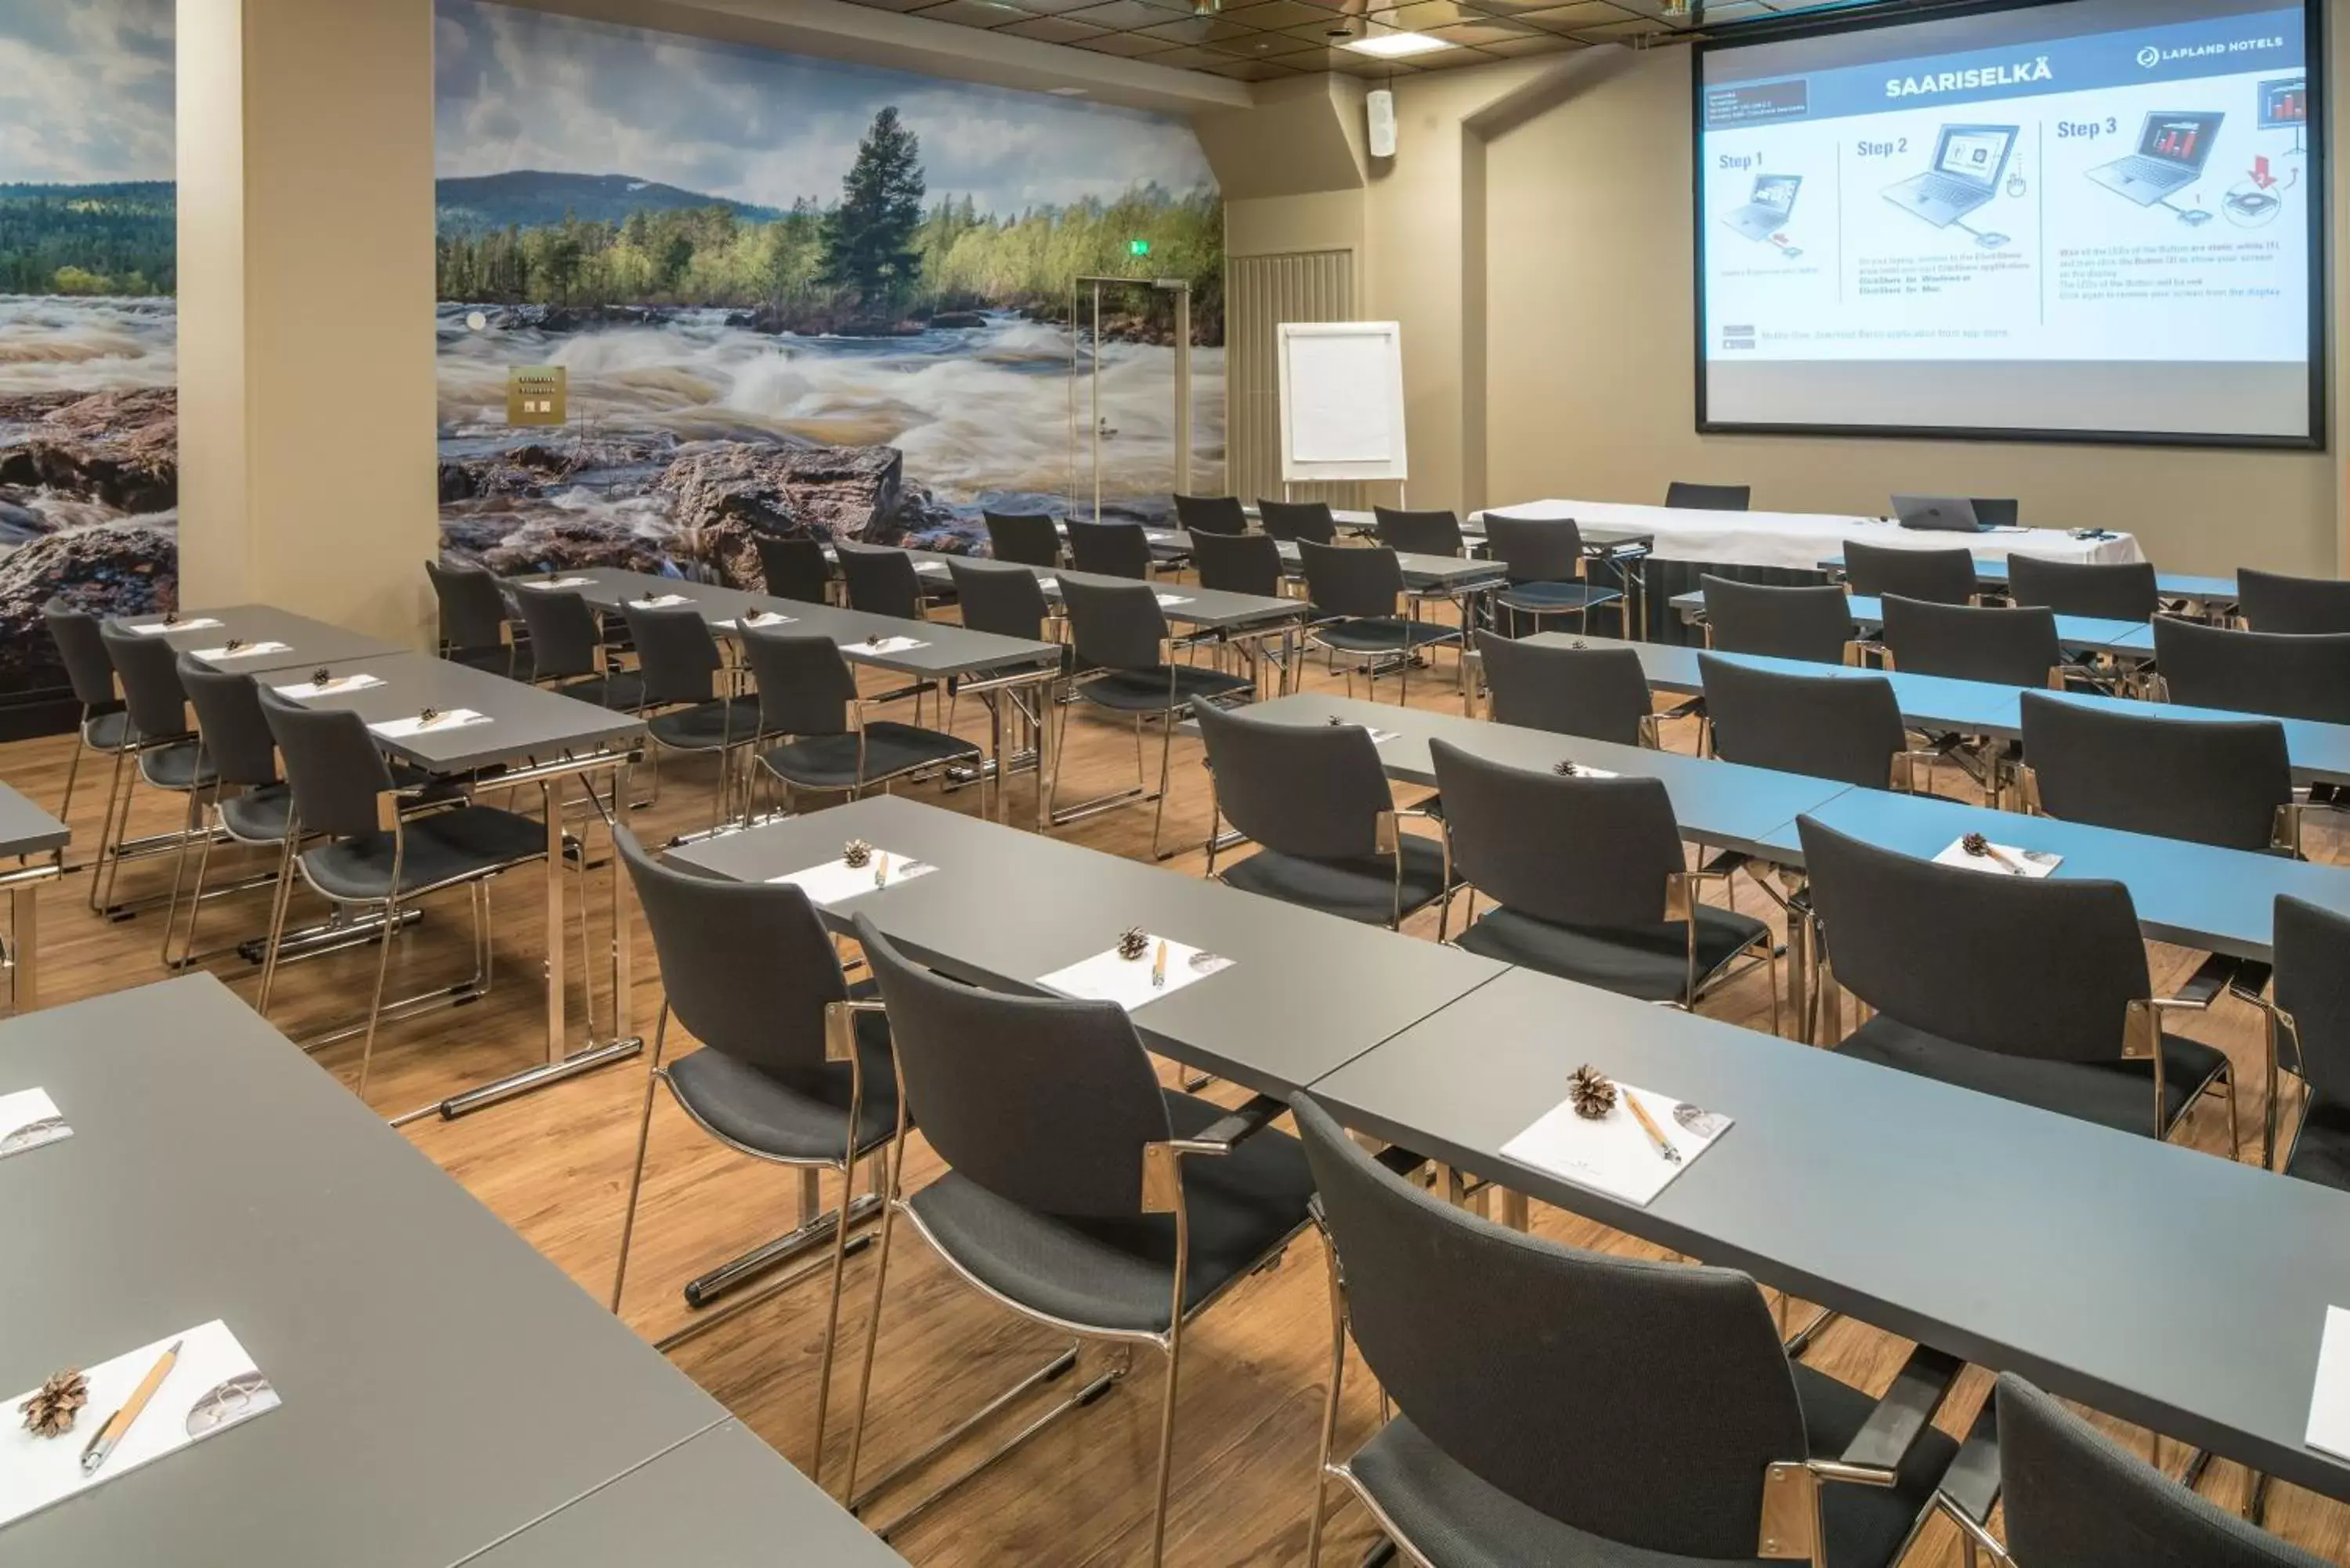 Meeting/conference room in Lapland Hotels Oulu